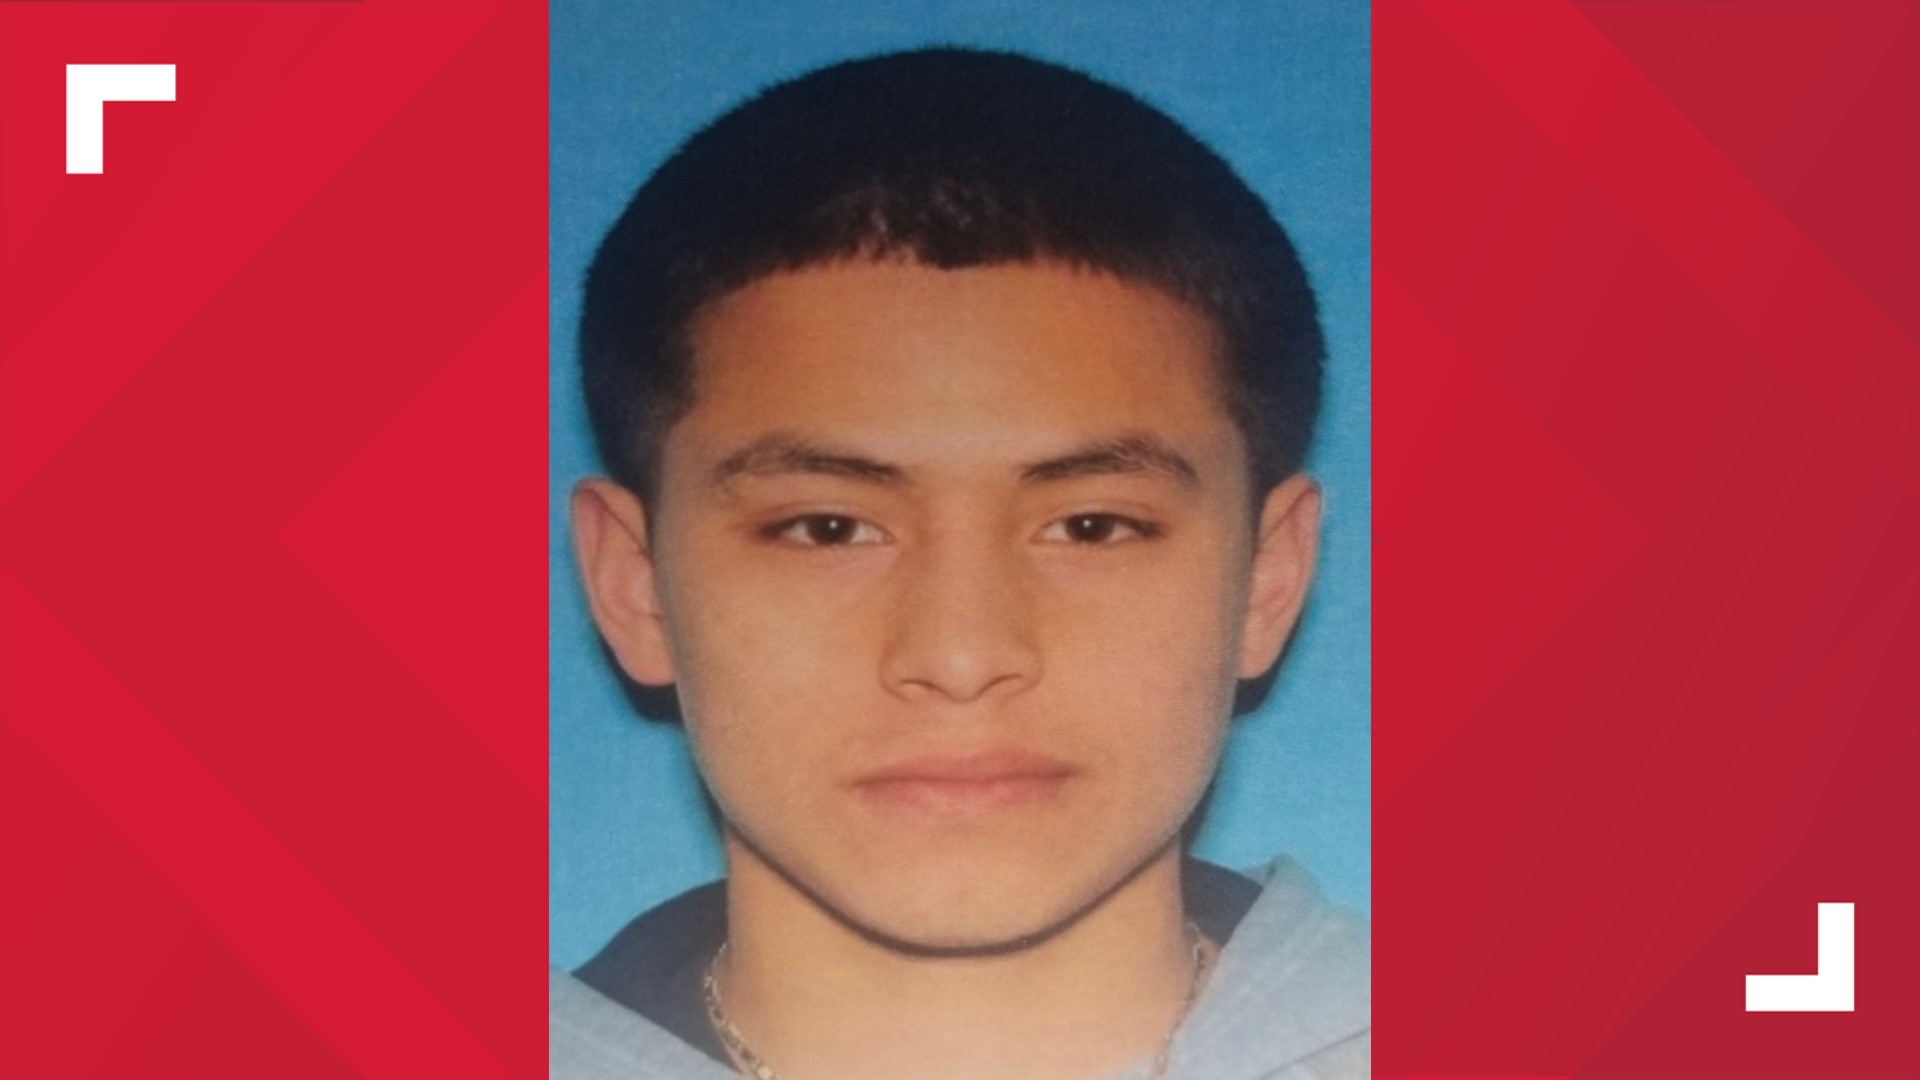 Oscar Valentin Lopez, 18, was arrested by Customs and Border Protection while trying to cross into the U.S.